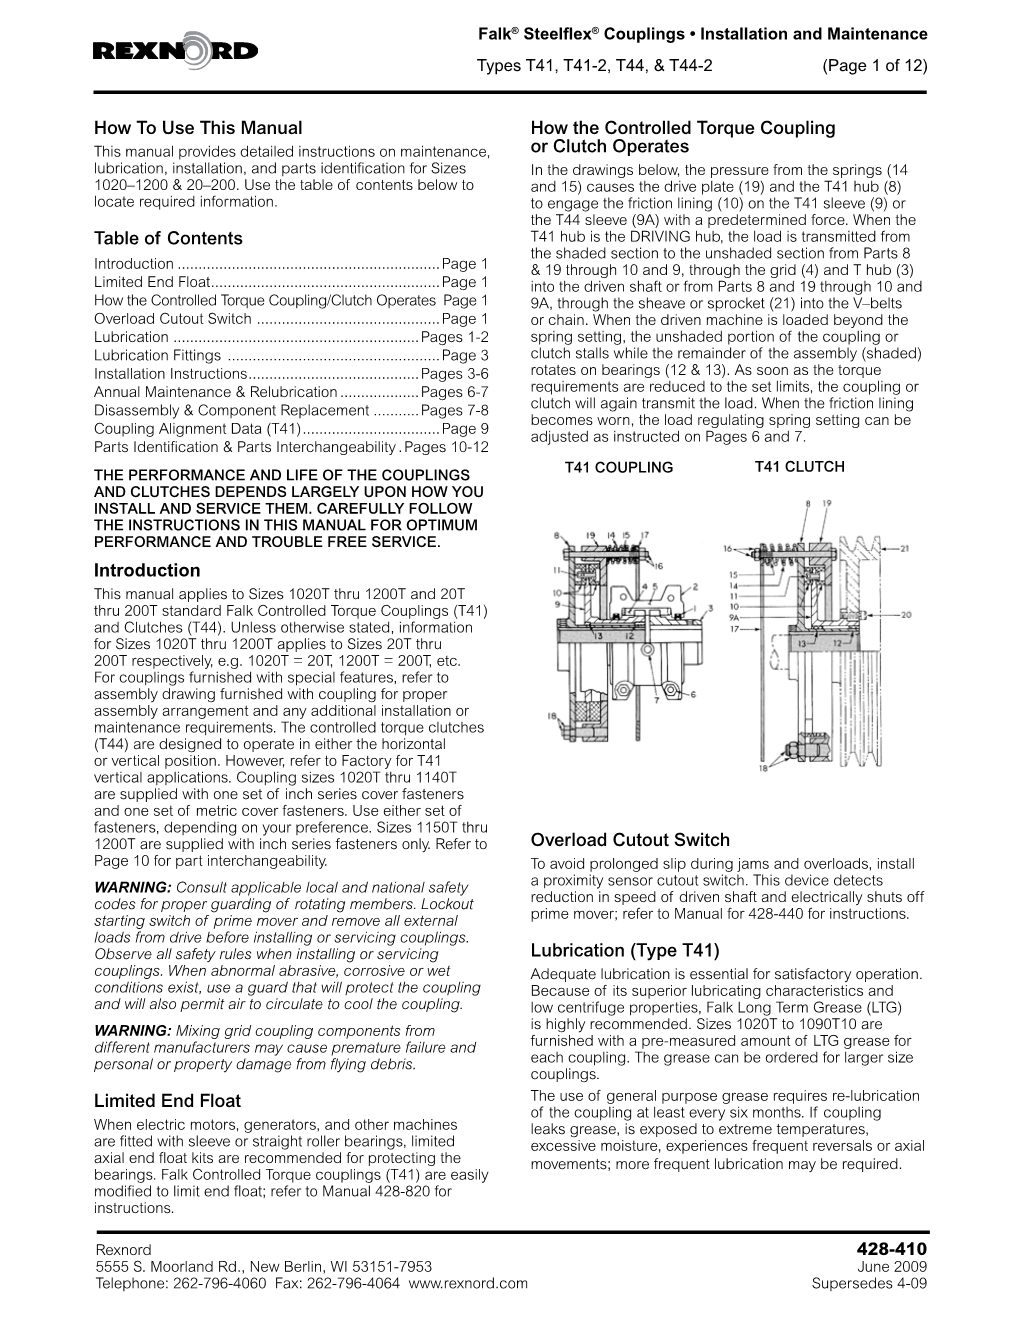 Falk Steelflex Couplings • Installation and Maintenance Types T41, T41-2, T44, & T44-2 (Page 3 of 12)